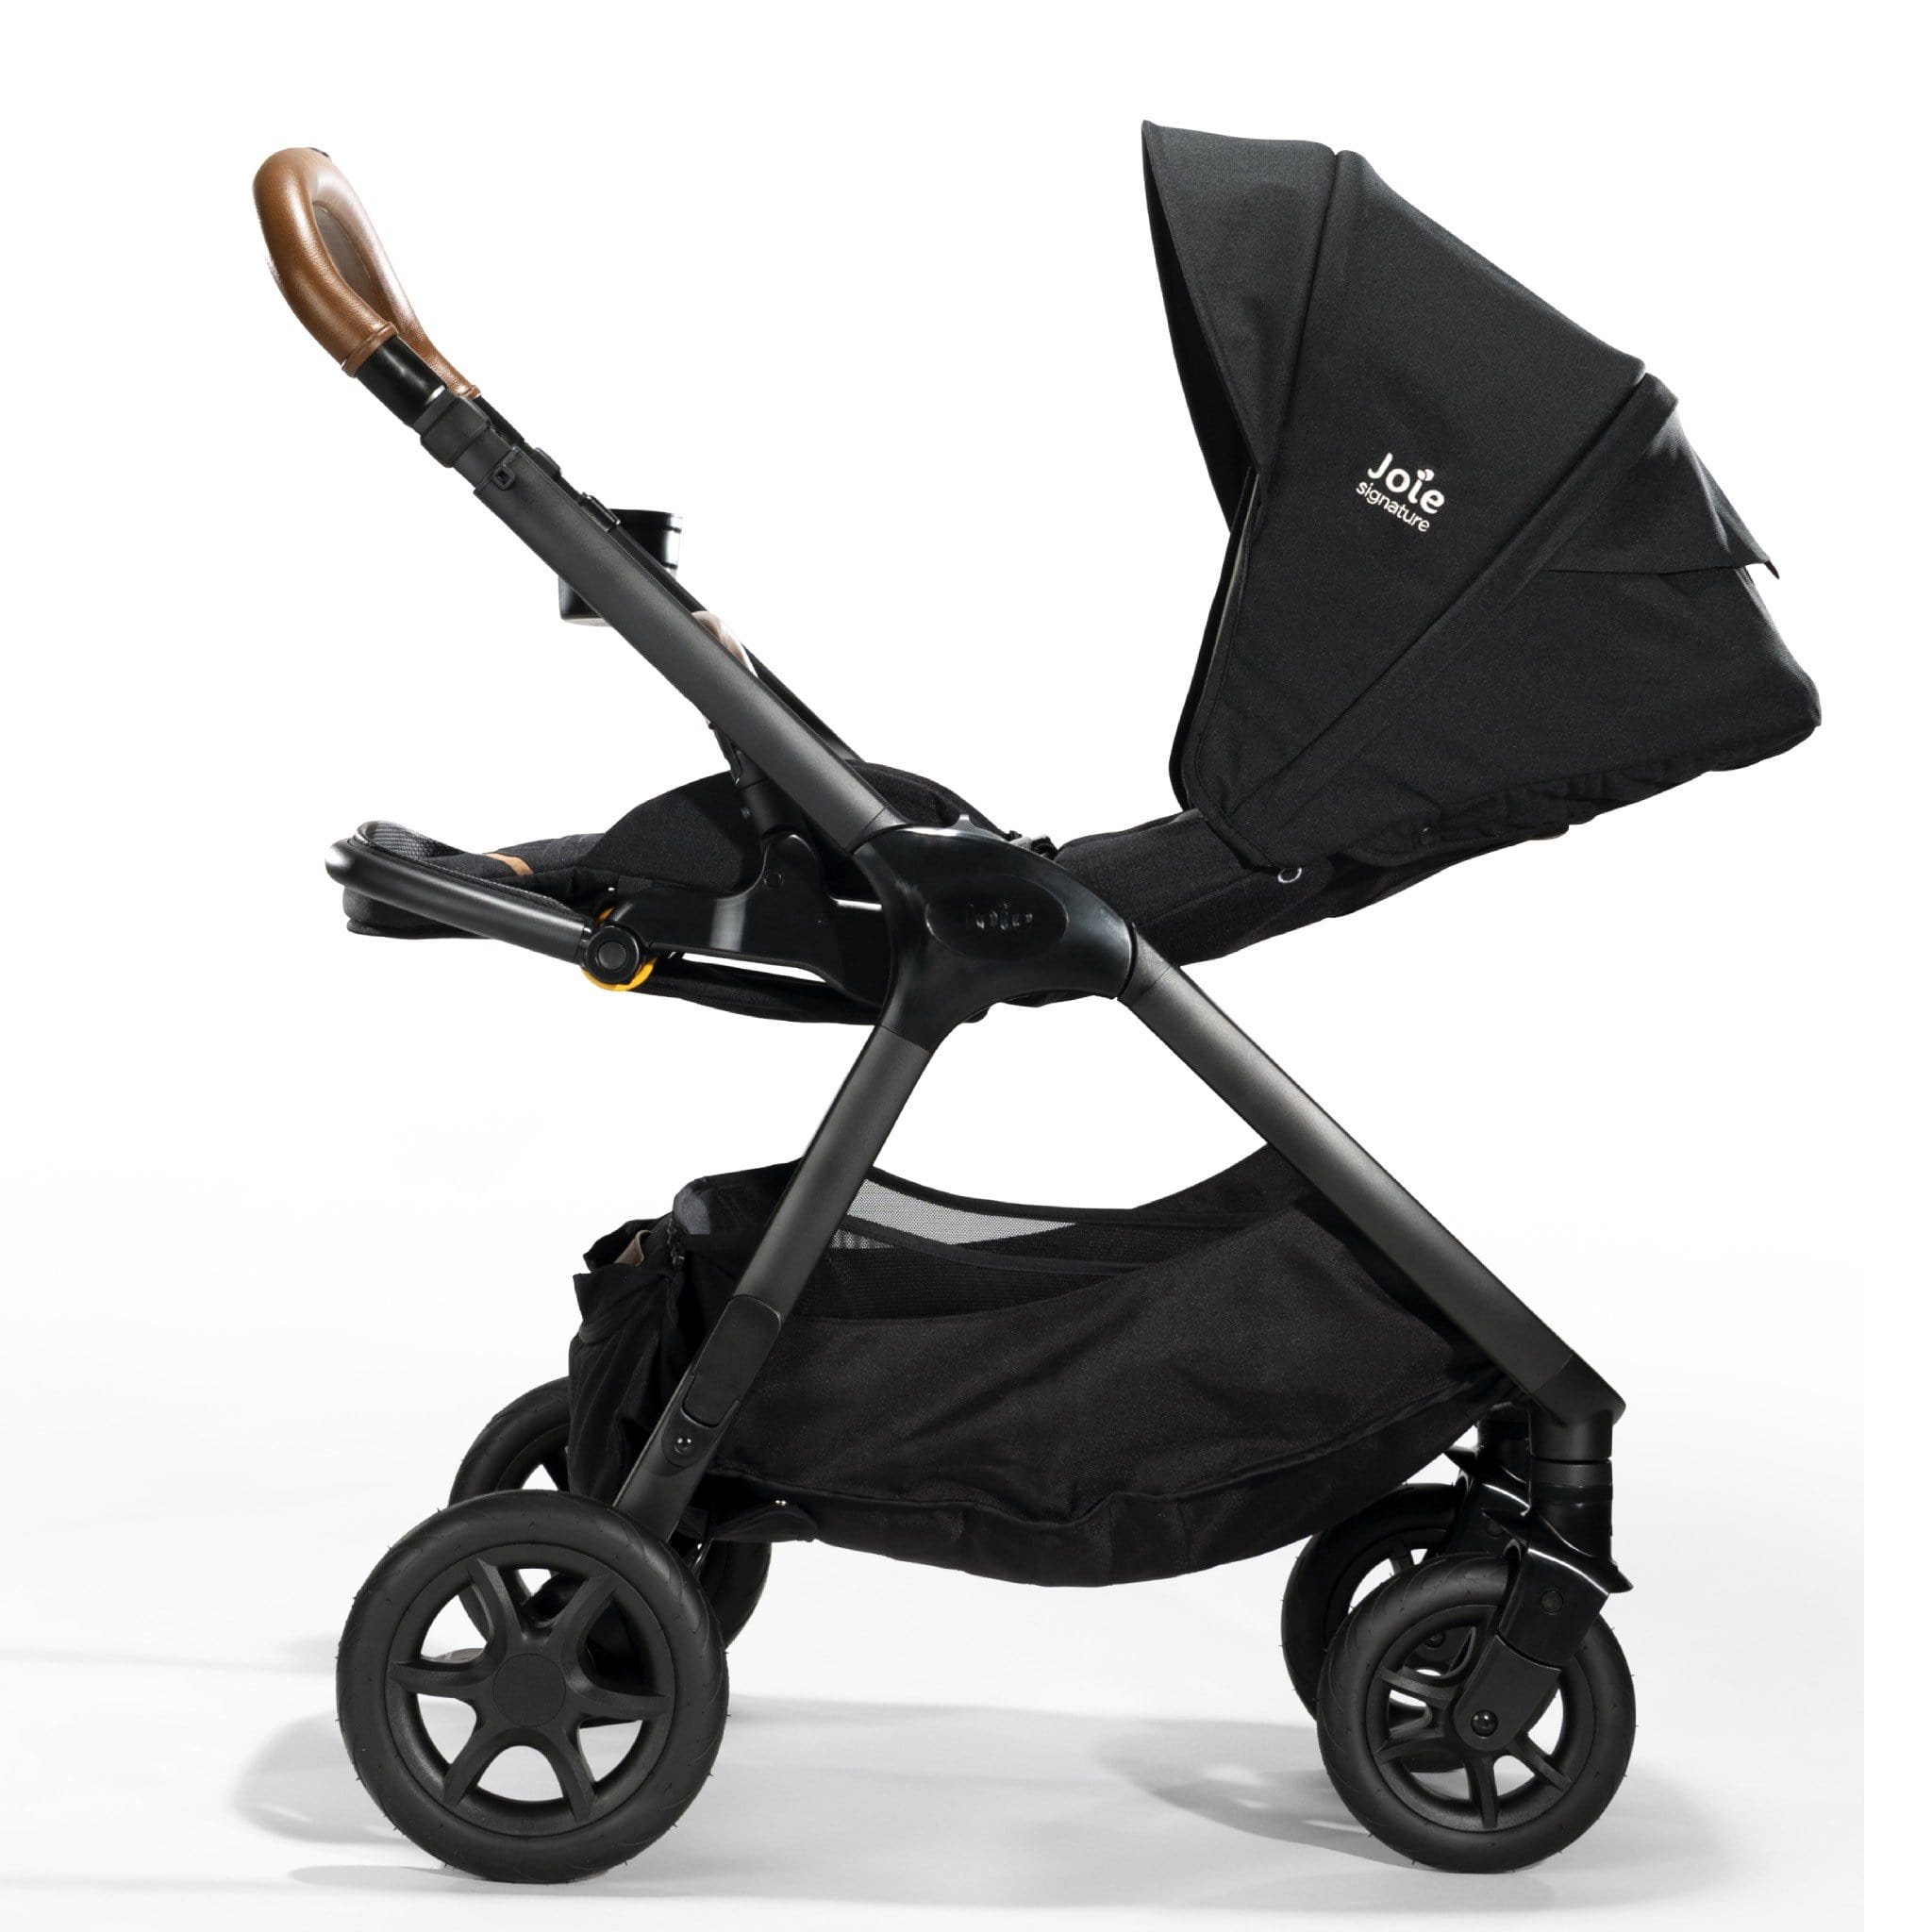 Joie baby prams Joie Finiti 4in1 Signature Edition Pushchair & Carrycot Eclipse 9300-ECL